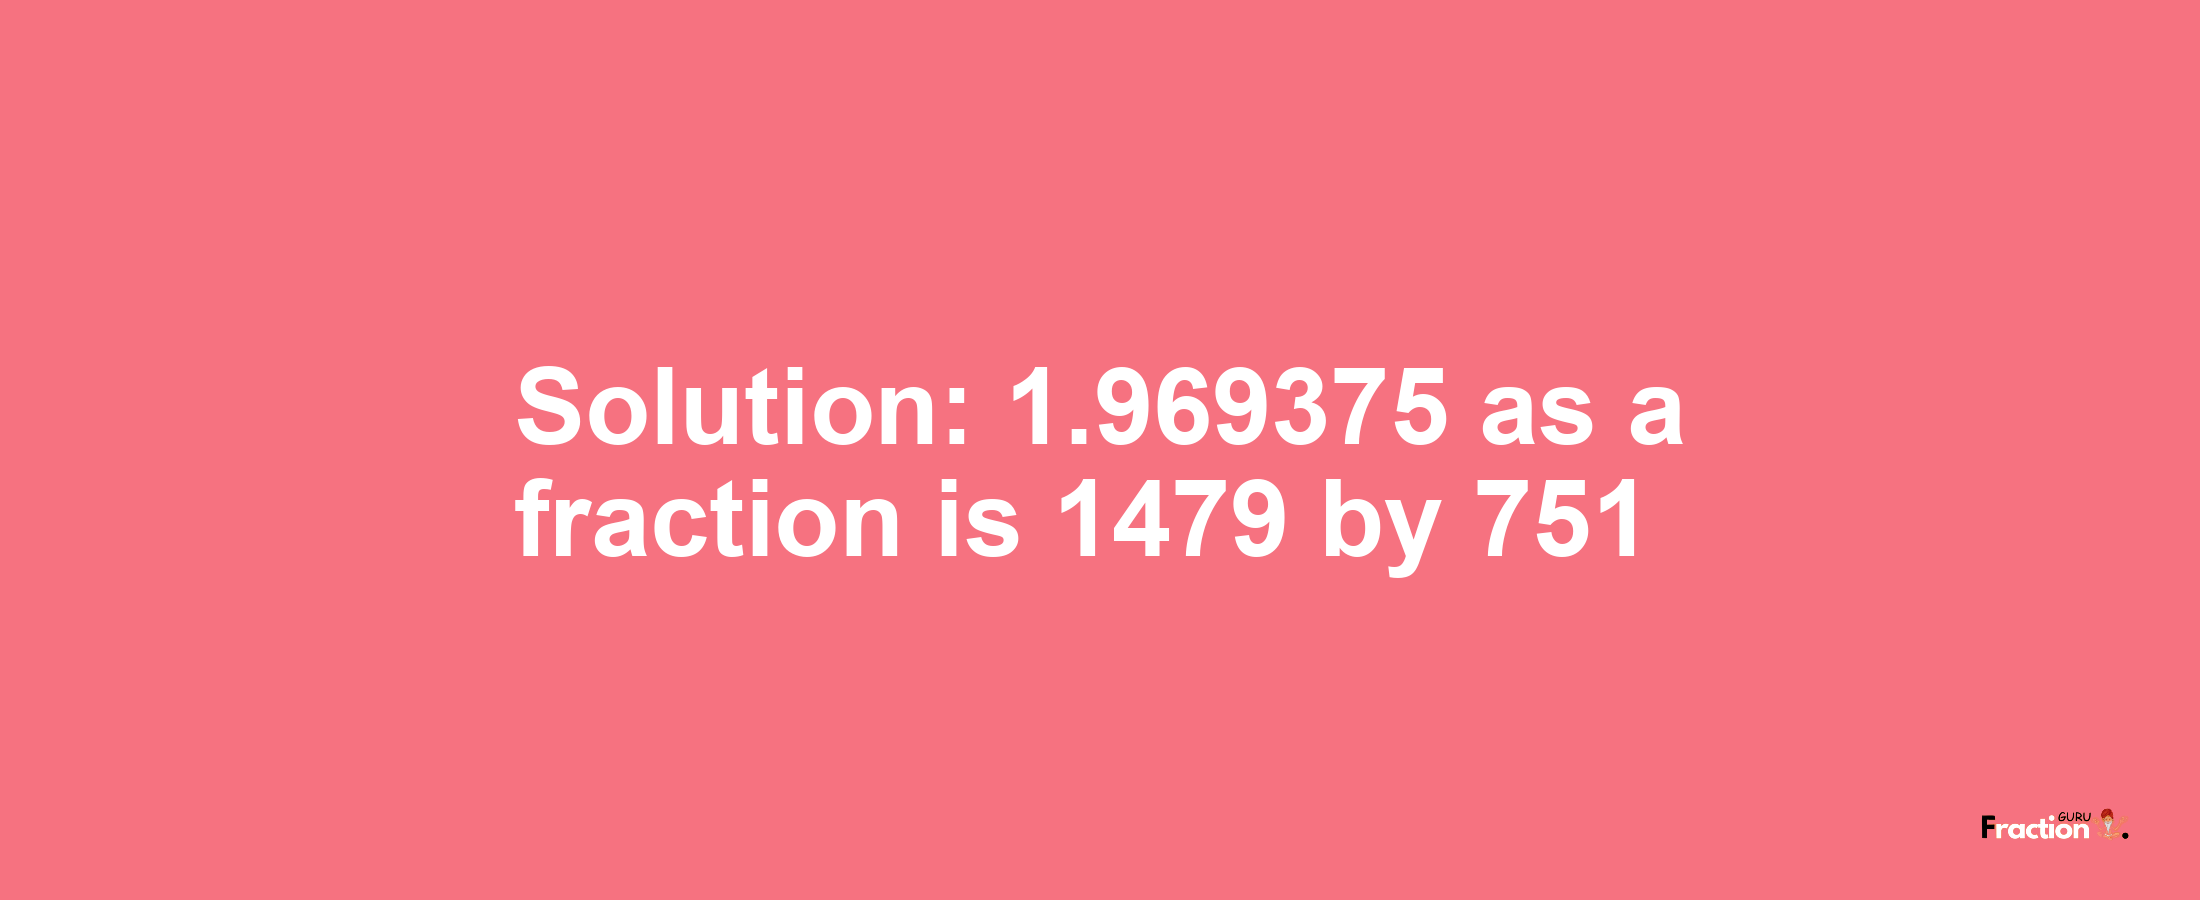 Solution:1.969375 as a fraction is 1479/751